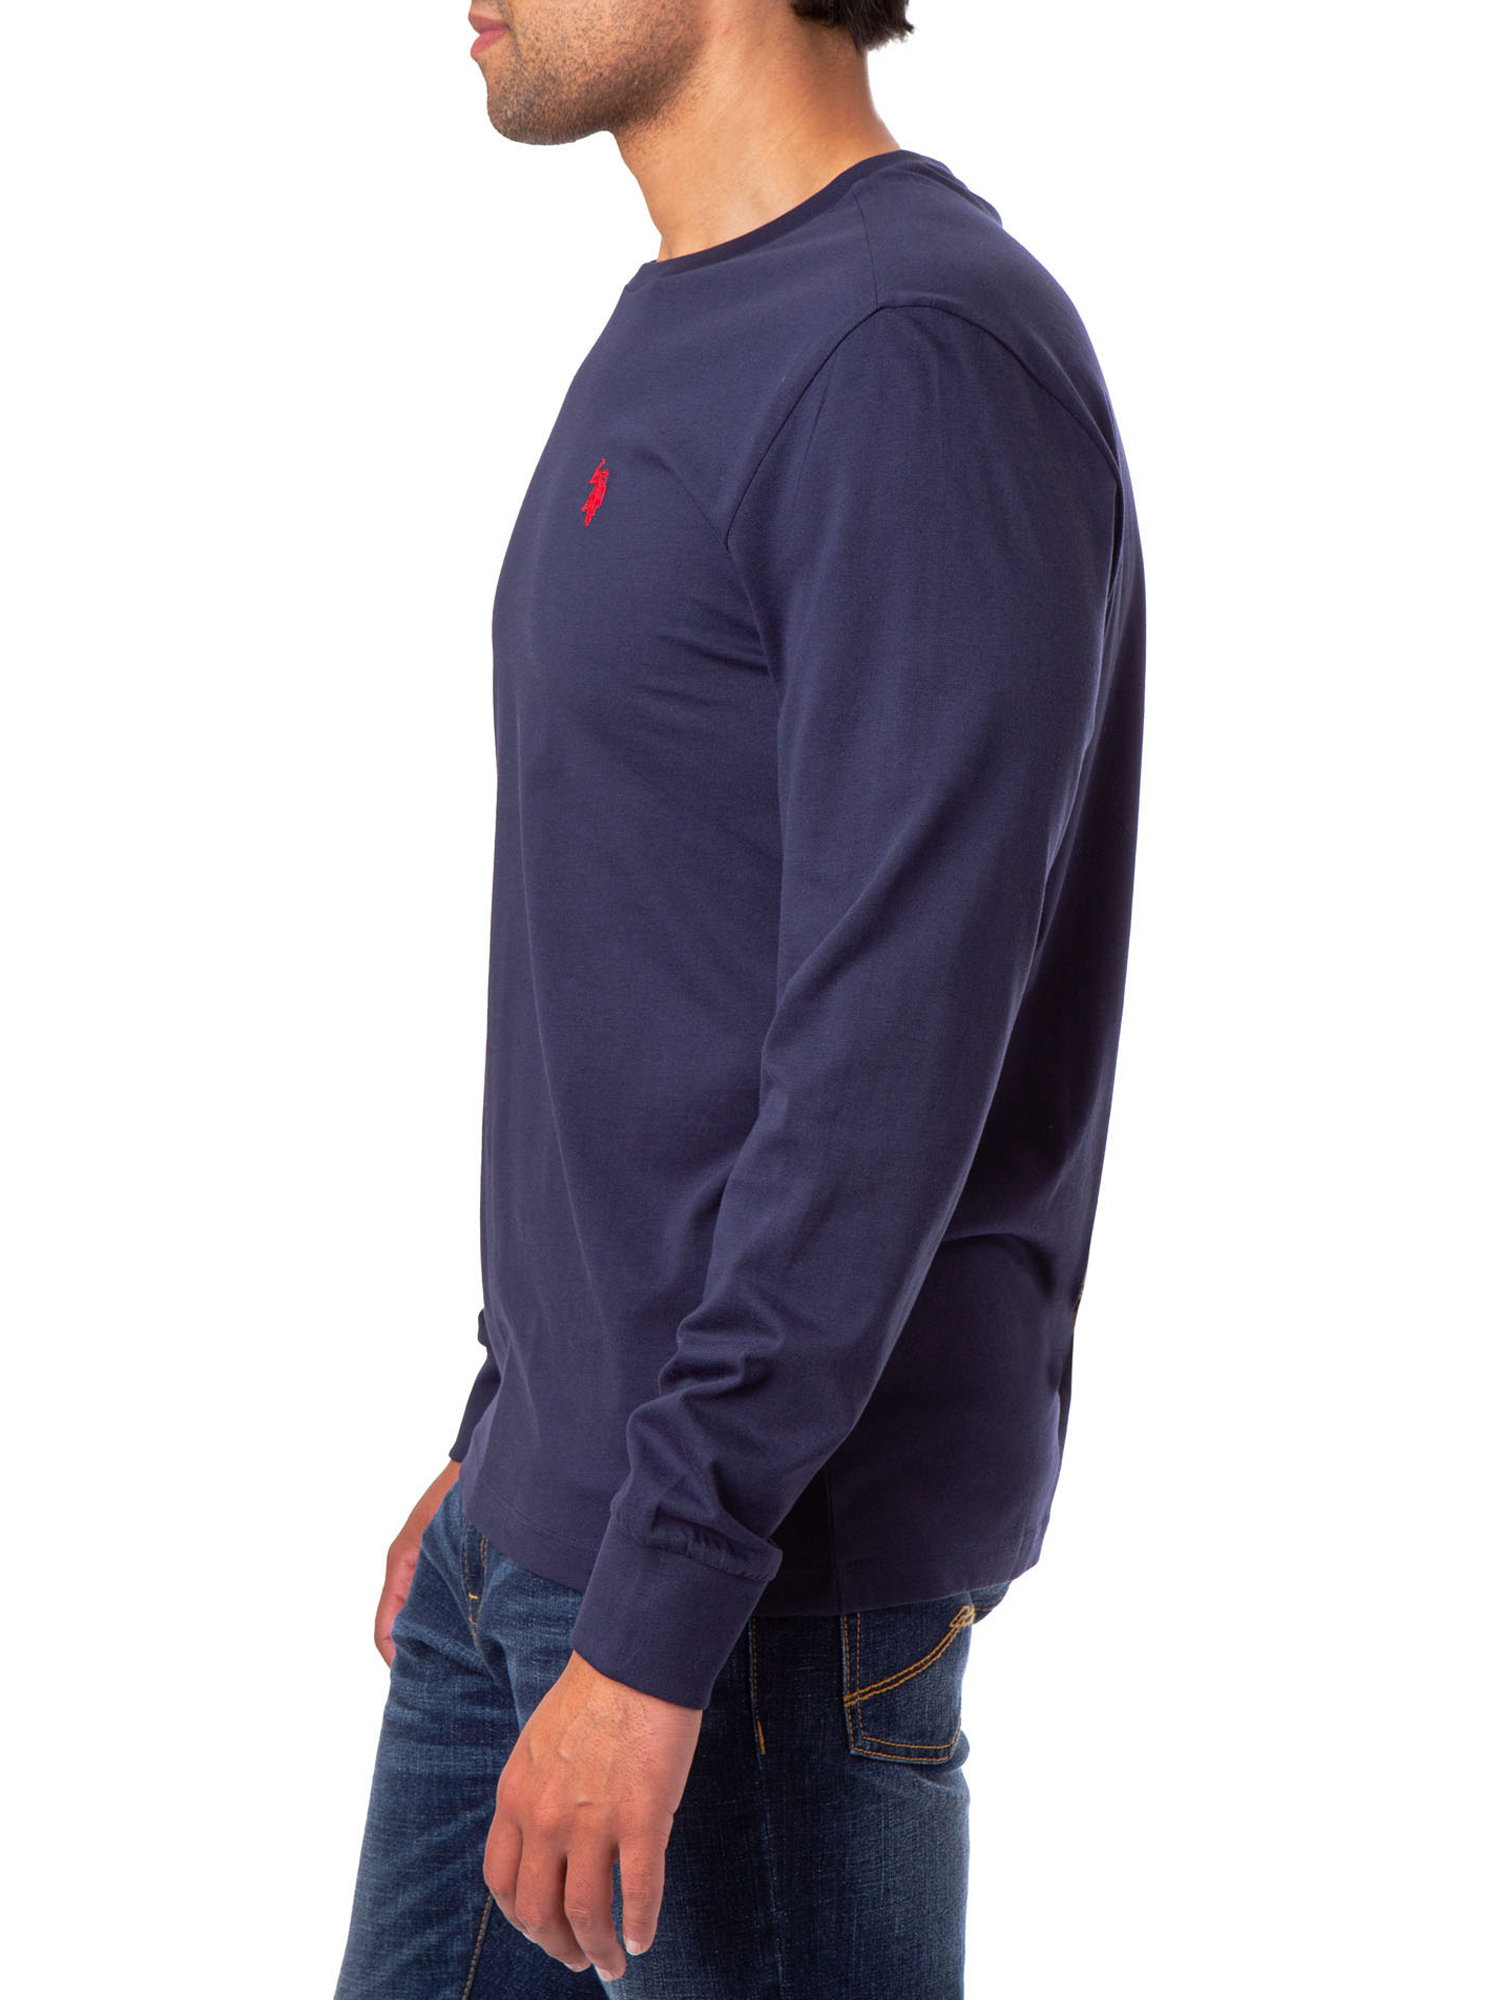 U.S. Polo Assn. Men's Long Sleeve Solid T-Shirt - image 3 of 3